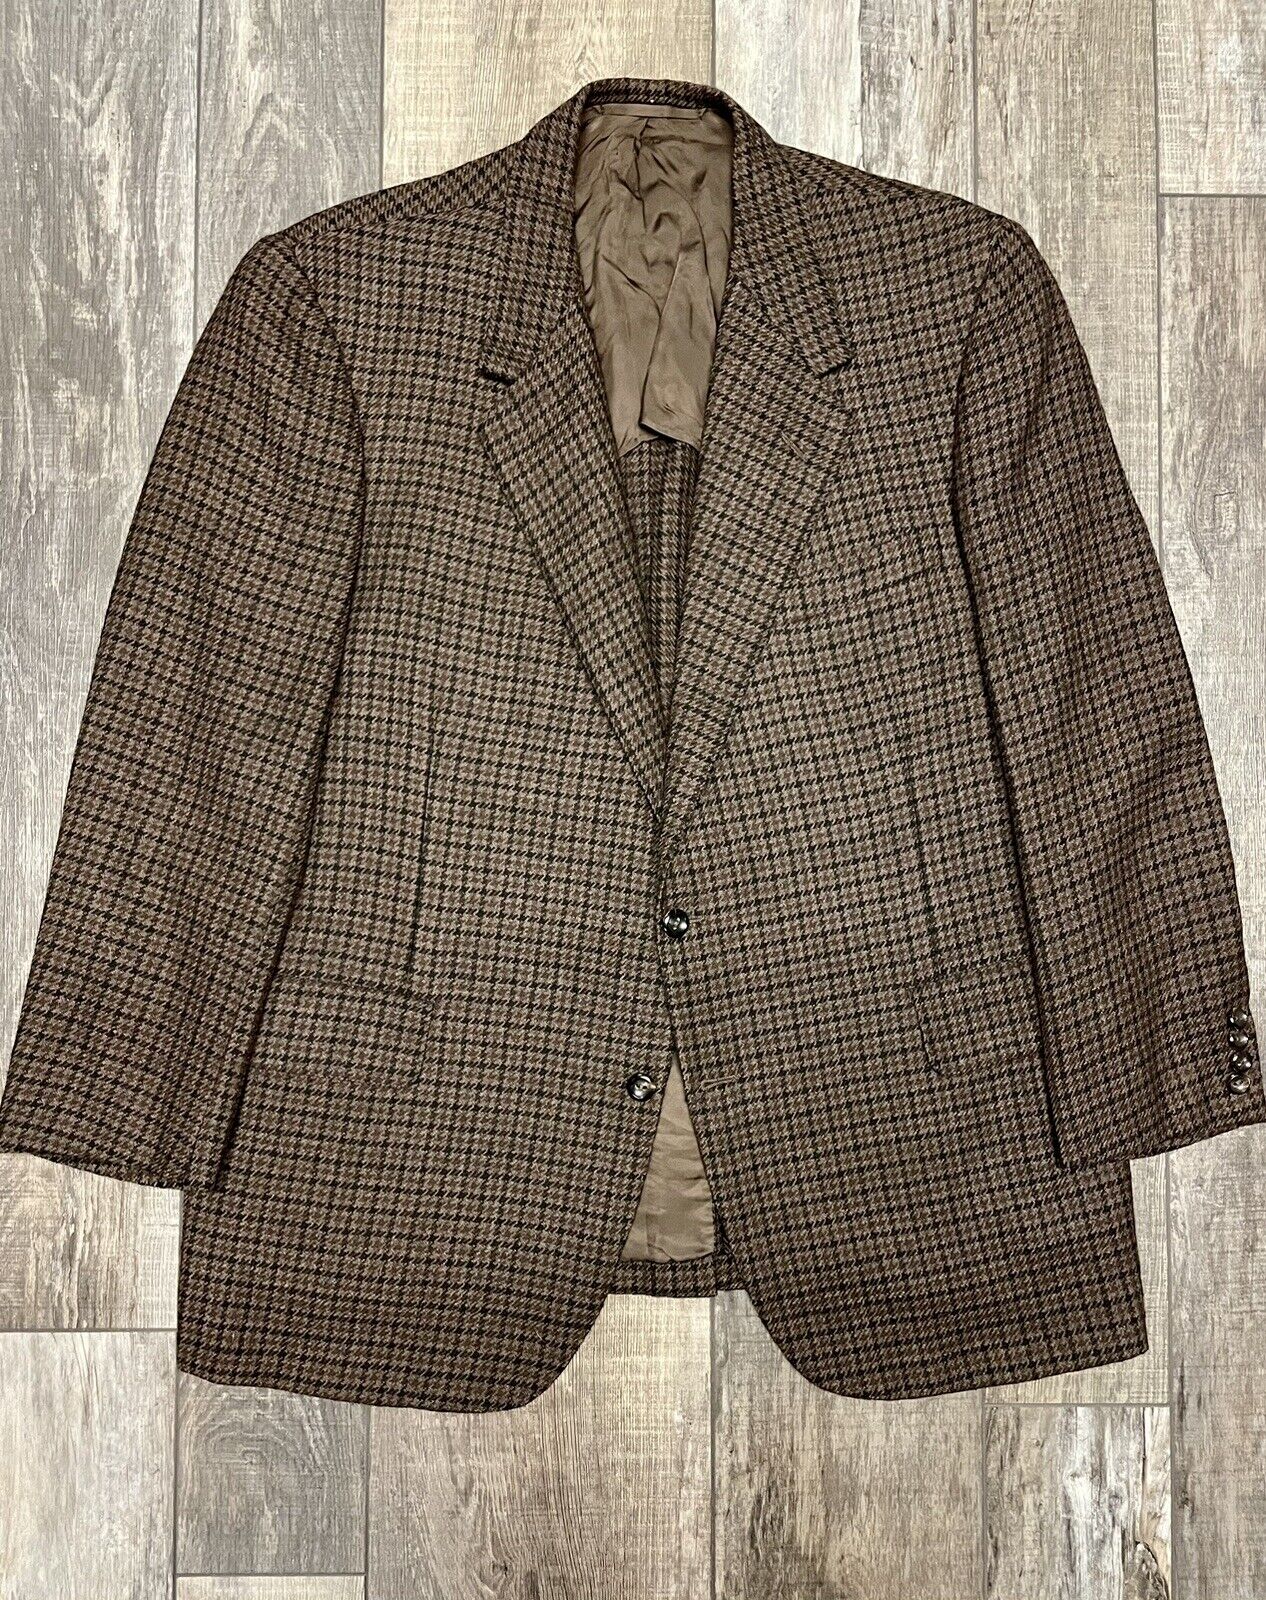 Vintage OXXFORD Clothes brown Houndstooth Tweed Blazer 44R Made in USA ...